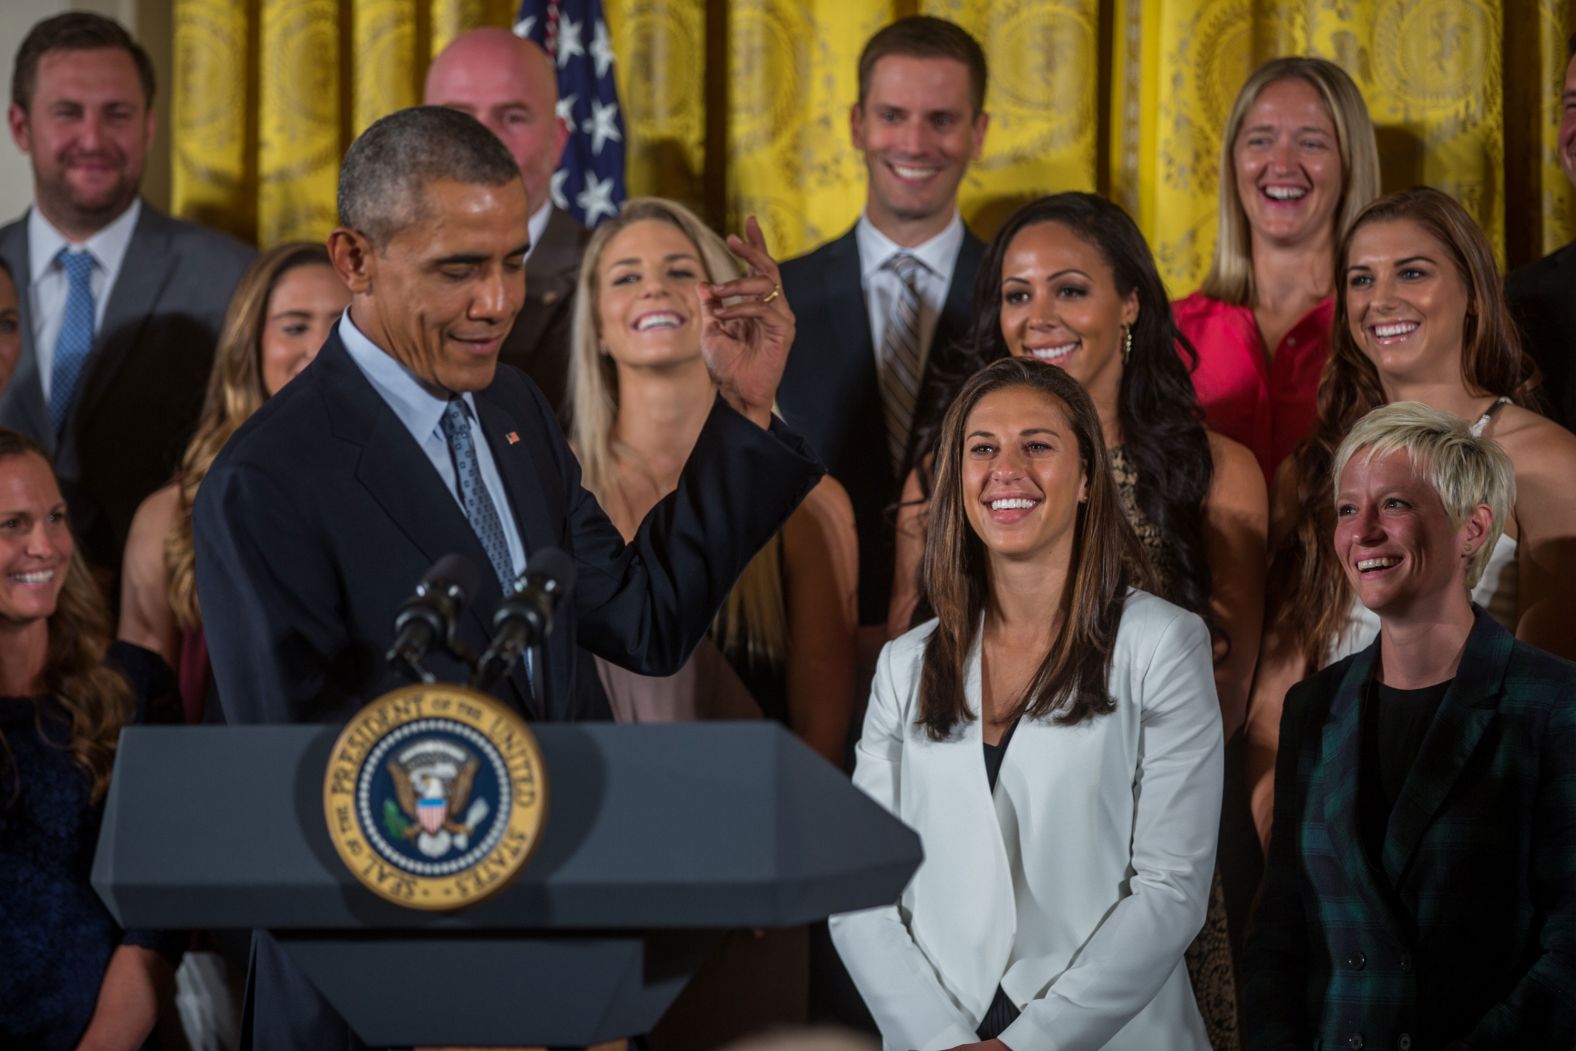 Rapinoe, far right, looks on with her teammates as then-President Obama welcomes them to the White House in October 2015. The visit was in honor of their World Cup victory.